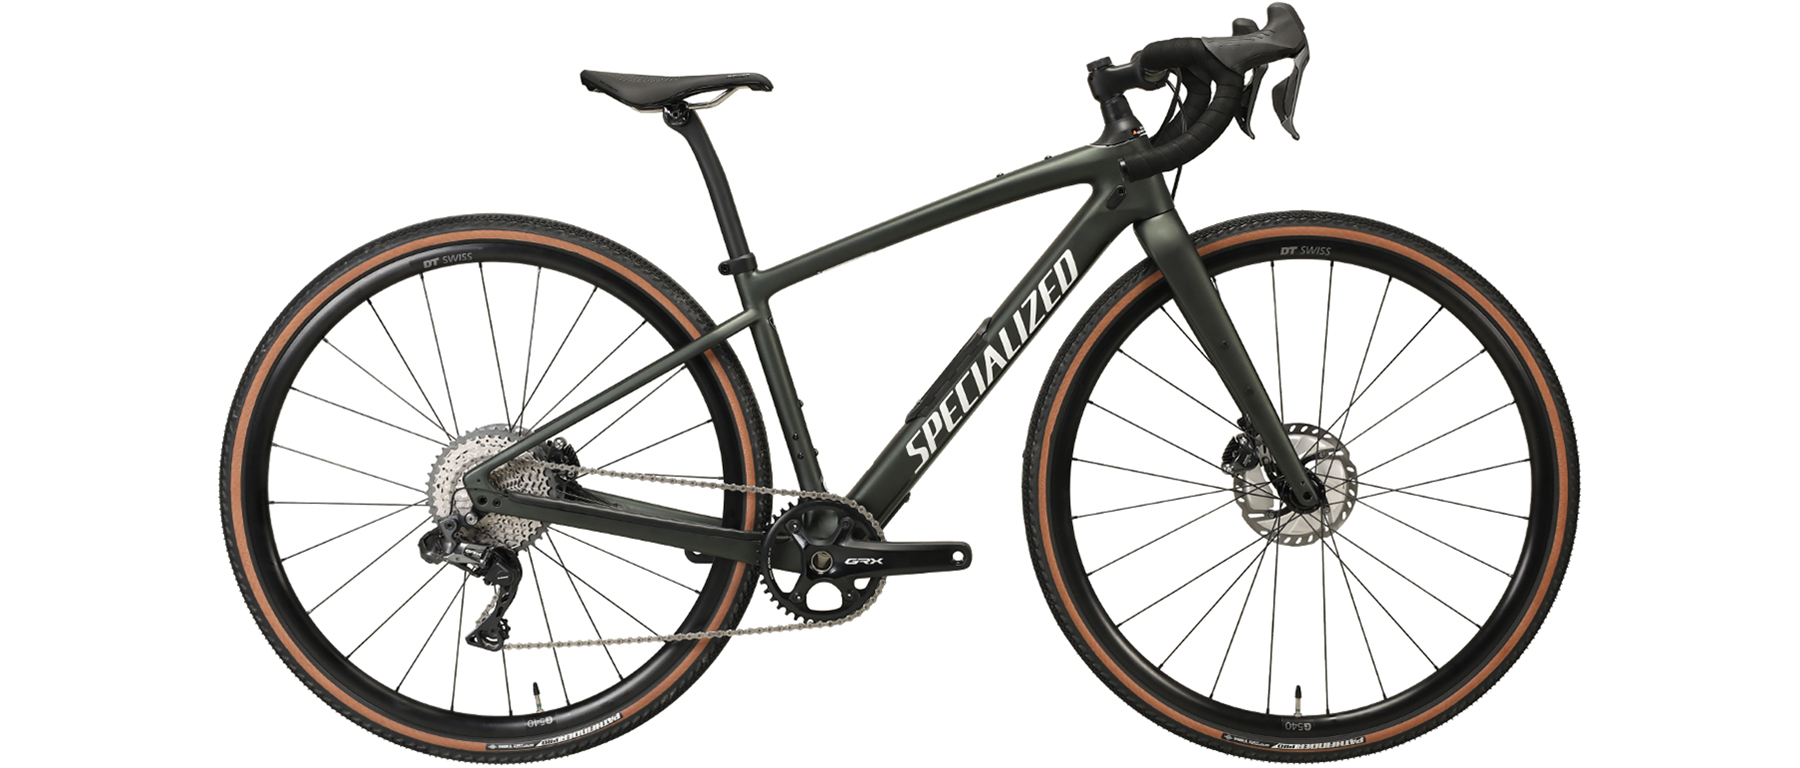 Specialized Diverge Expert Carbon Bicycle